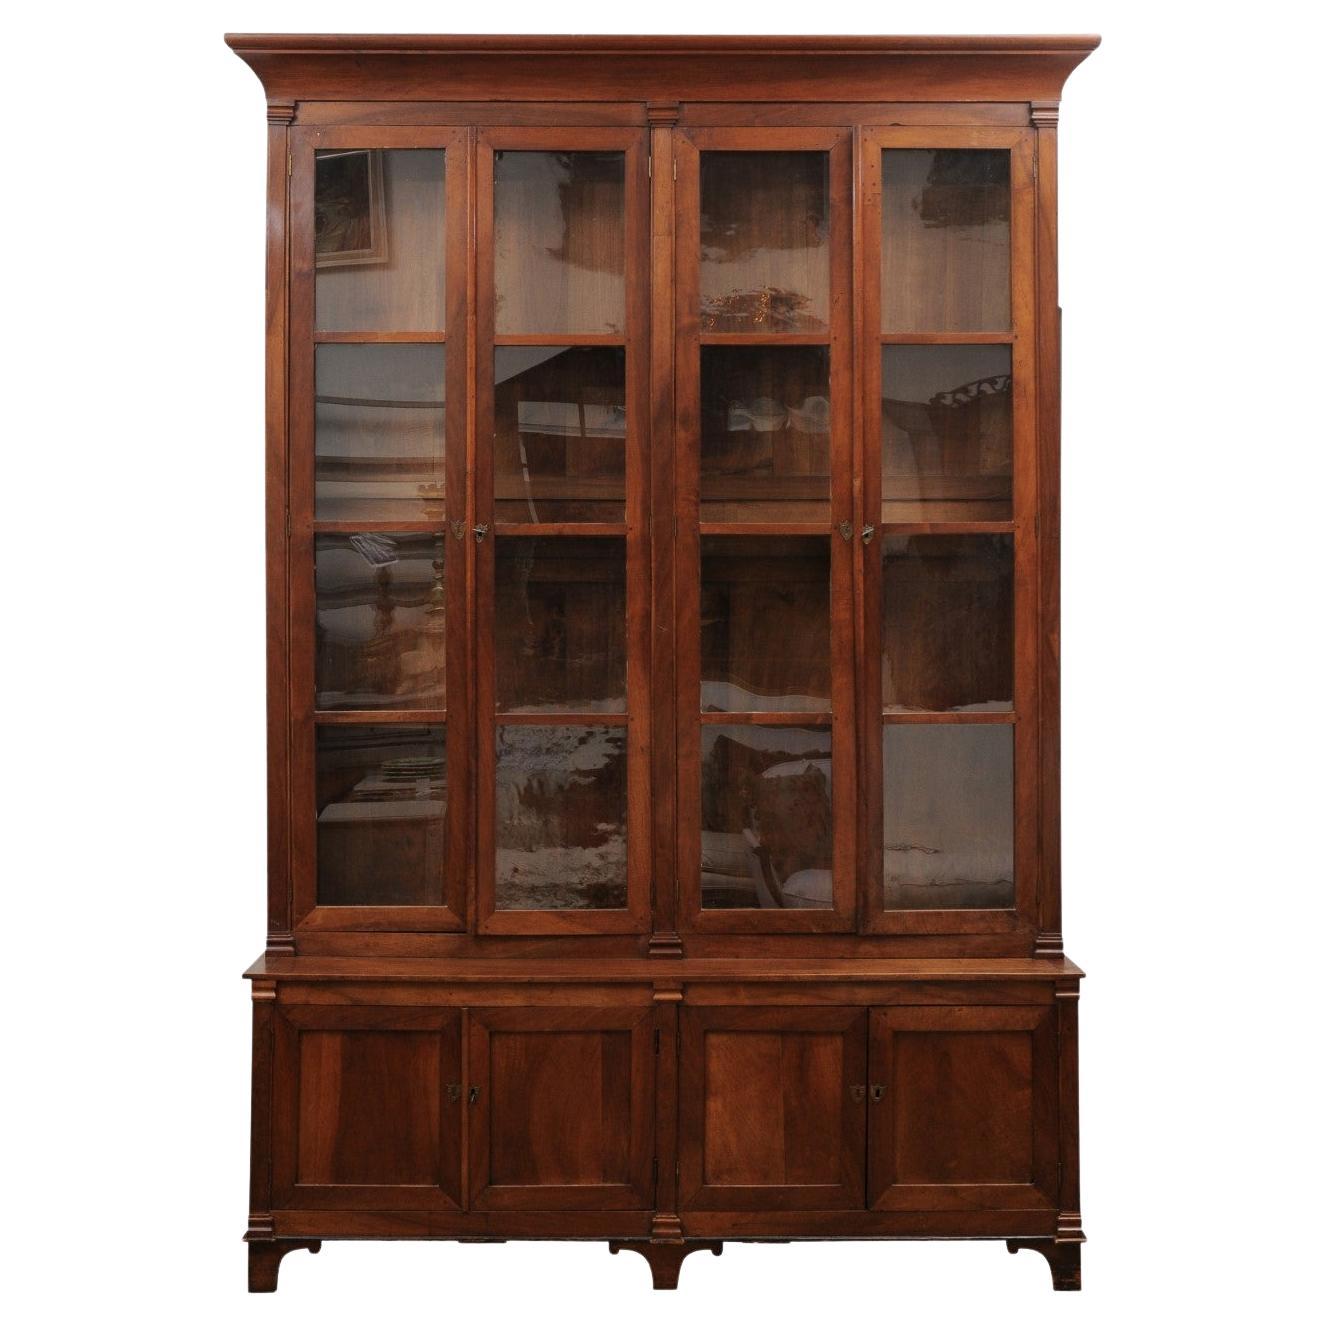 French 1880s Louis XVI Style Wood Bookcase with Glass Doors and Doric Pilasters